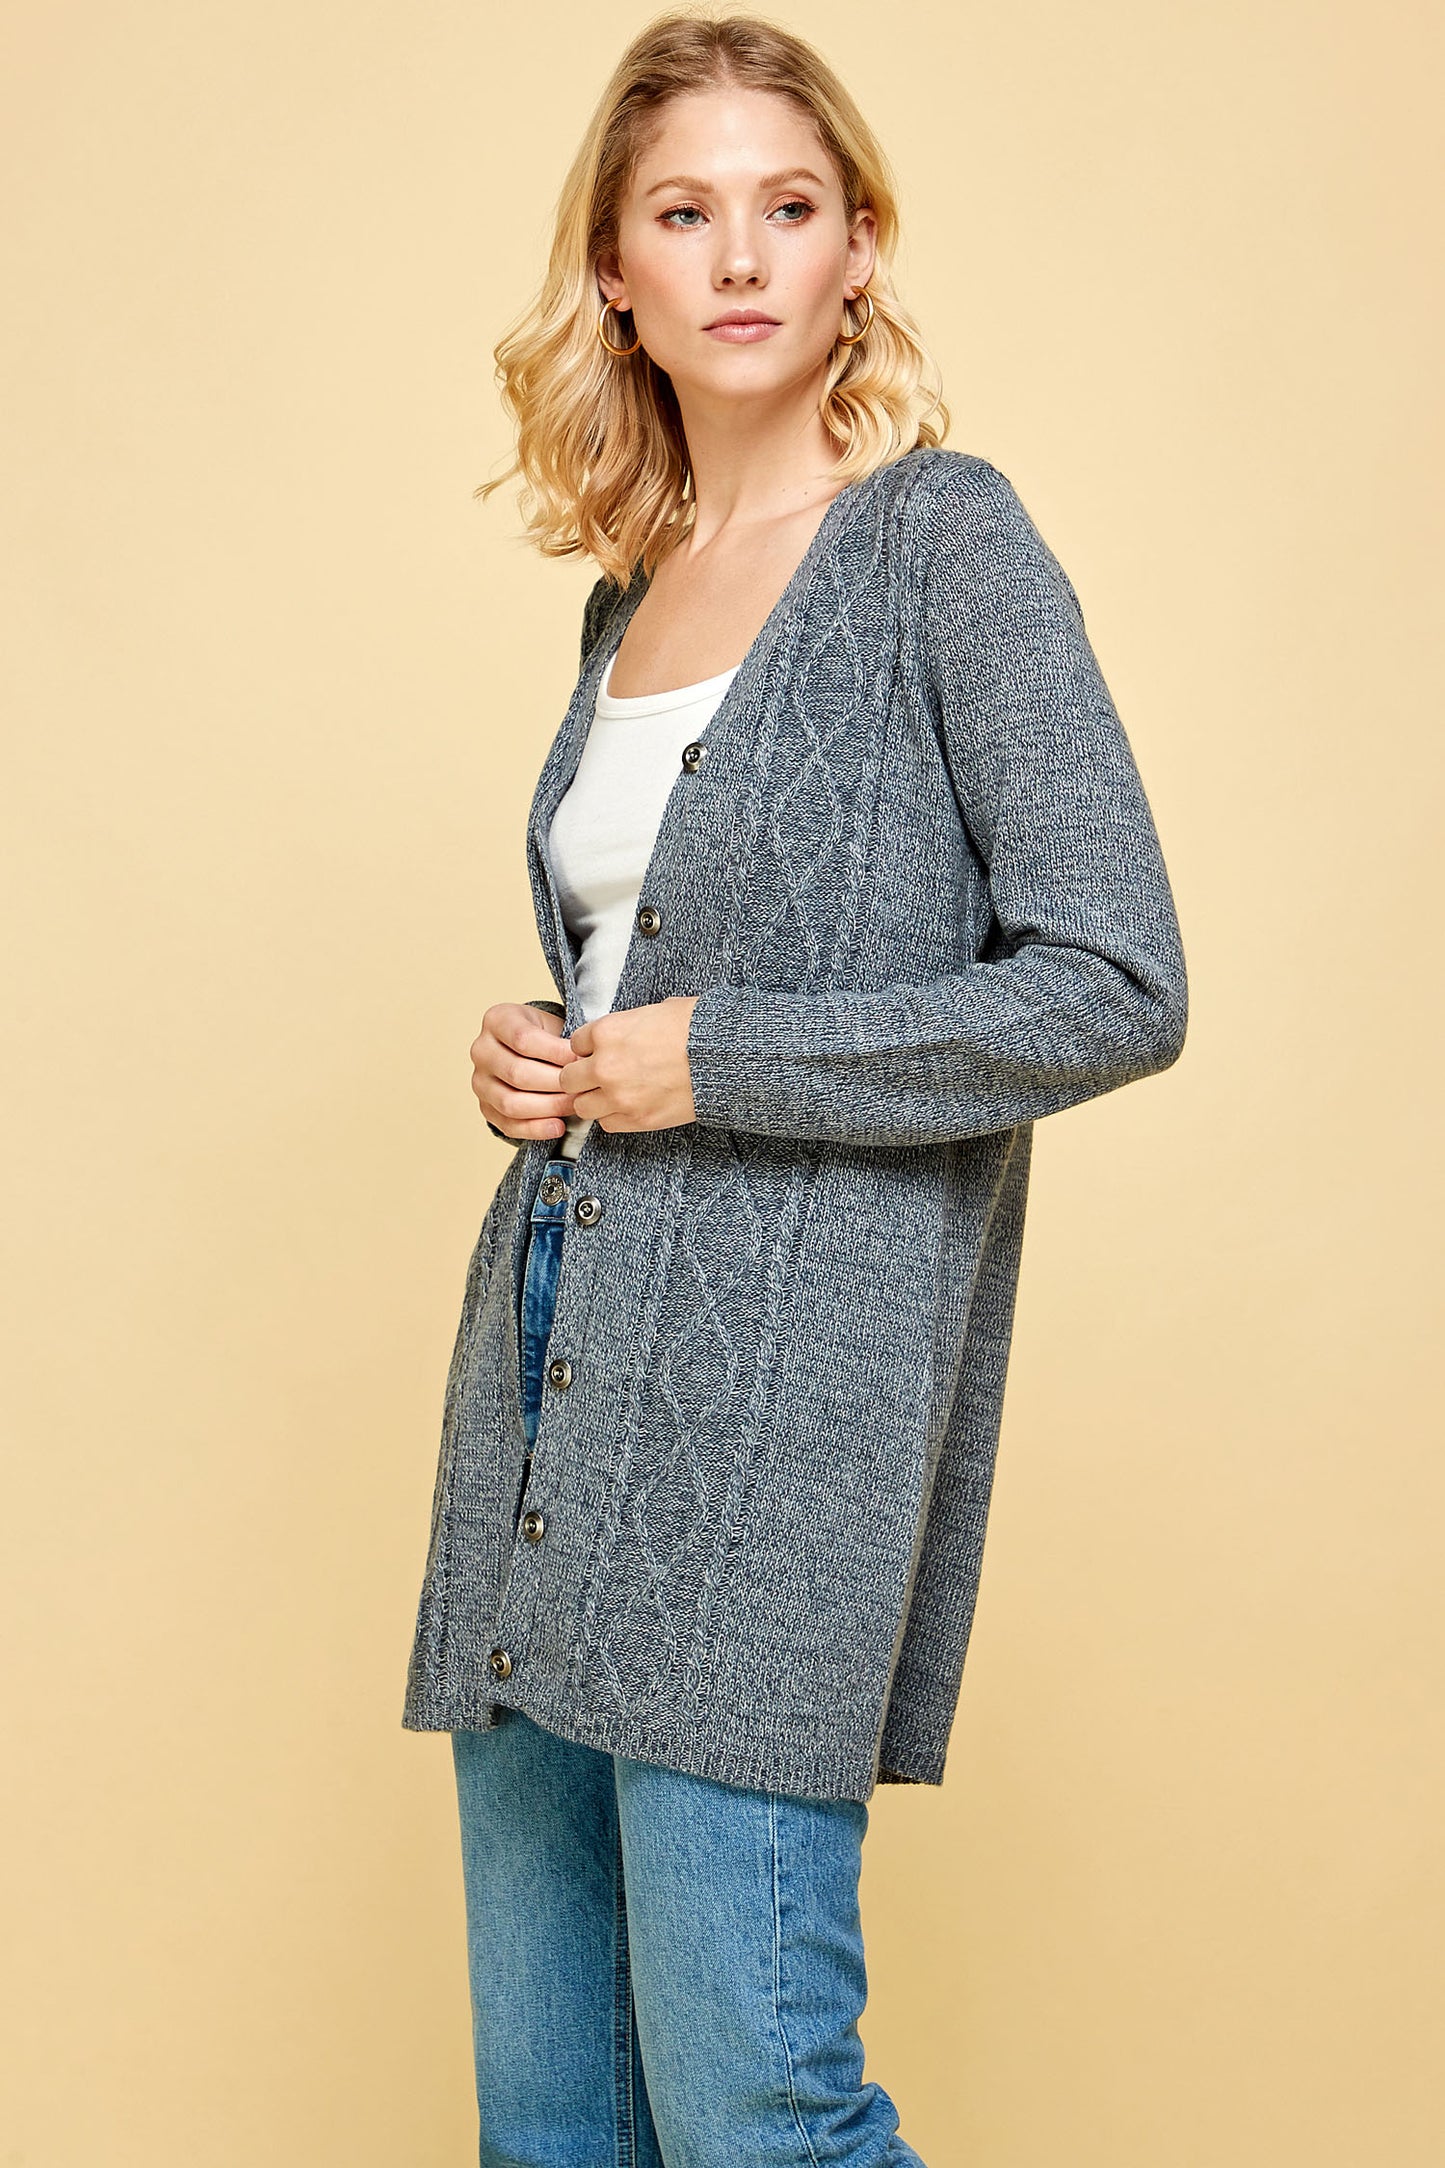 BUTTON FRONT V-NECK KNIT CARDIGAN IN GREY